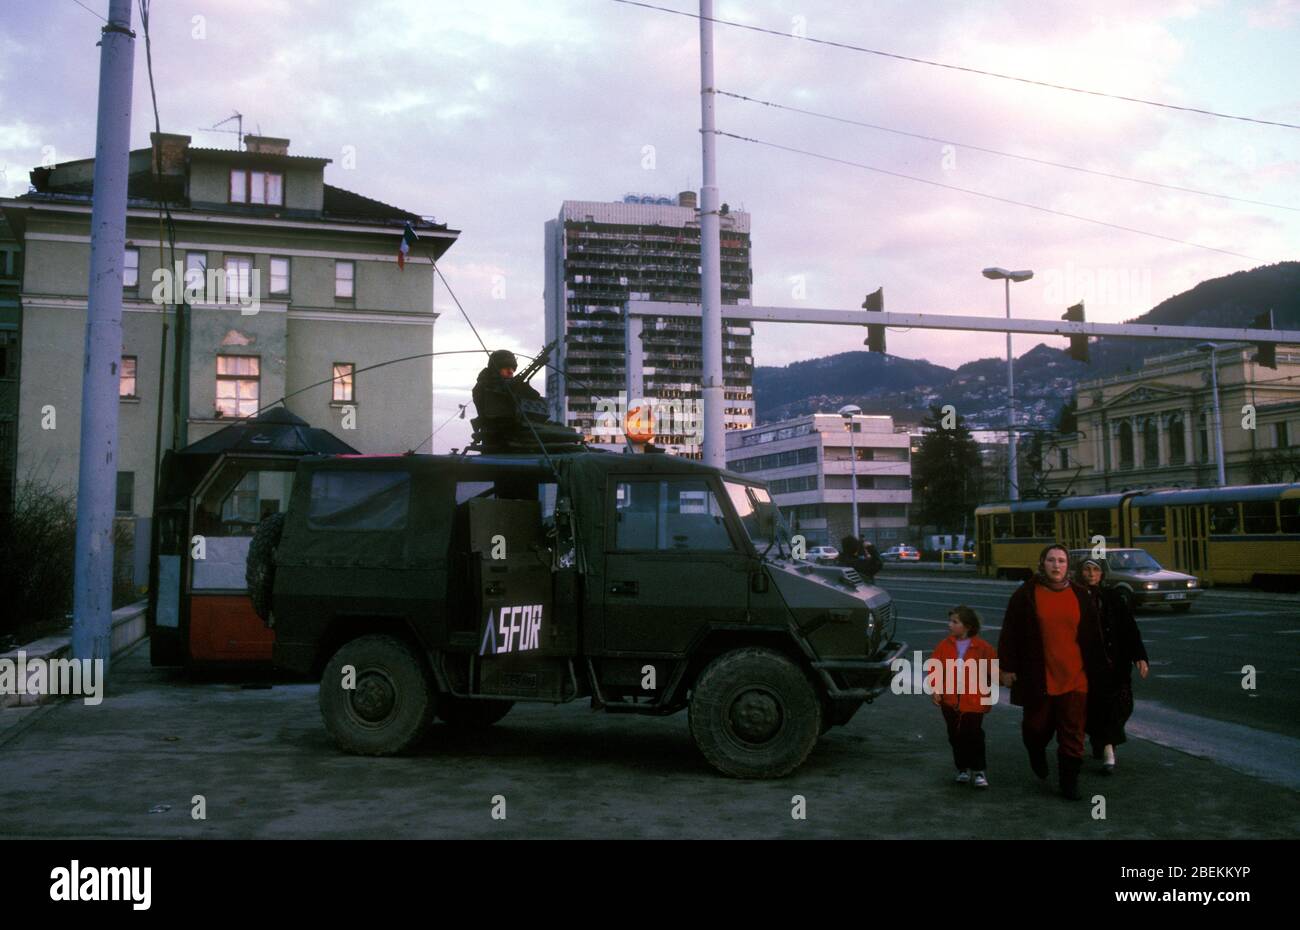 Sarajevo 1998 - SFOR soldiers observing movement on Meša Selimović Boulevard also known as 'Sniper alley' during the siege of Sarajevo, Bosnia Herzegovina Stock Photo